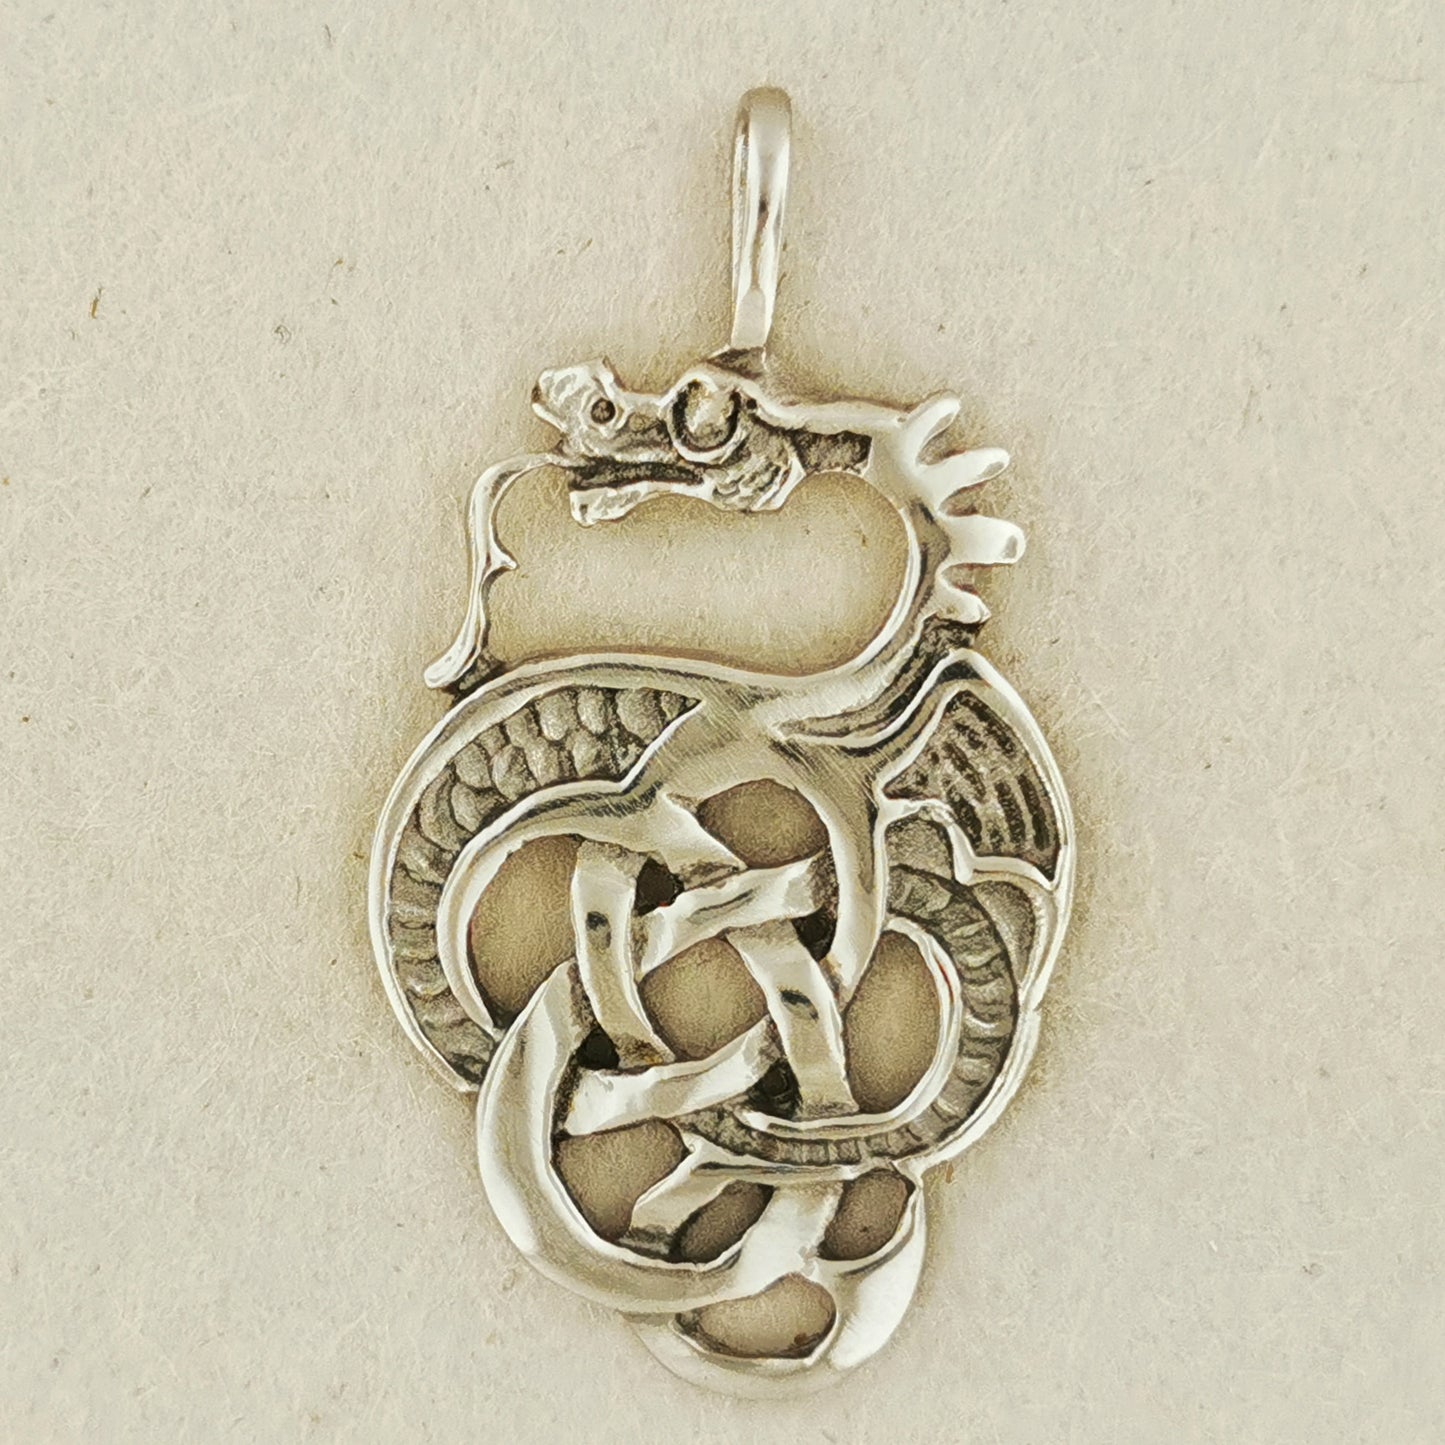 Celtic Knotwork Dragon Pendant in Stainless Steel, Silver Dragon Jewelry, Steel Celtic Dragon, Steel Dragon Pendant, Silver Dragon Pendant, Celtic Dragon Pendant, Stainless Steel Celtic Pendant, Stainless Steel Celtic Jewelry